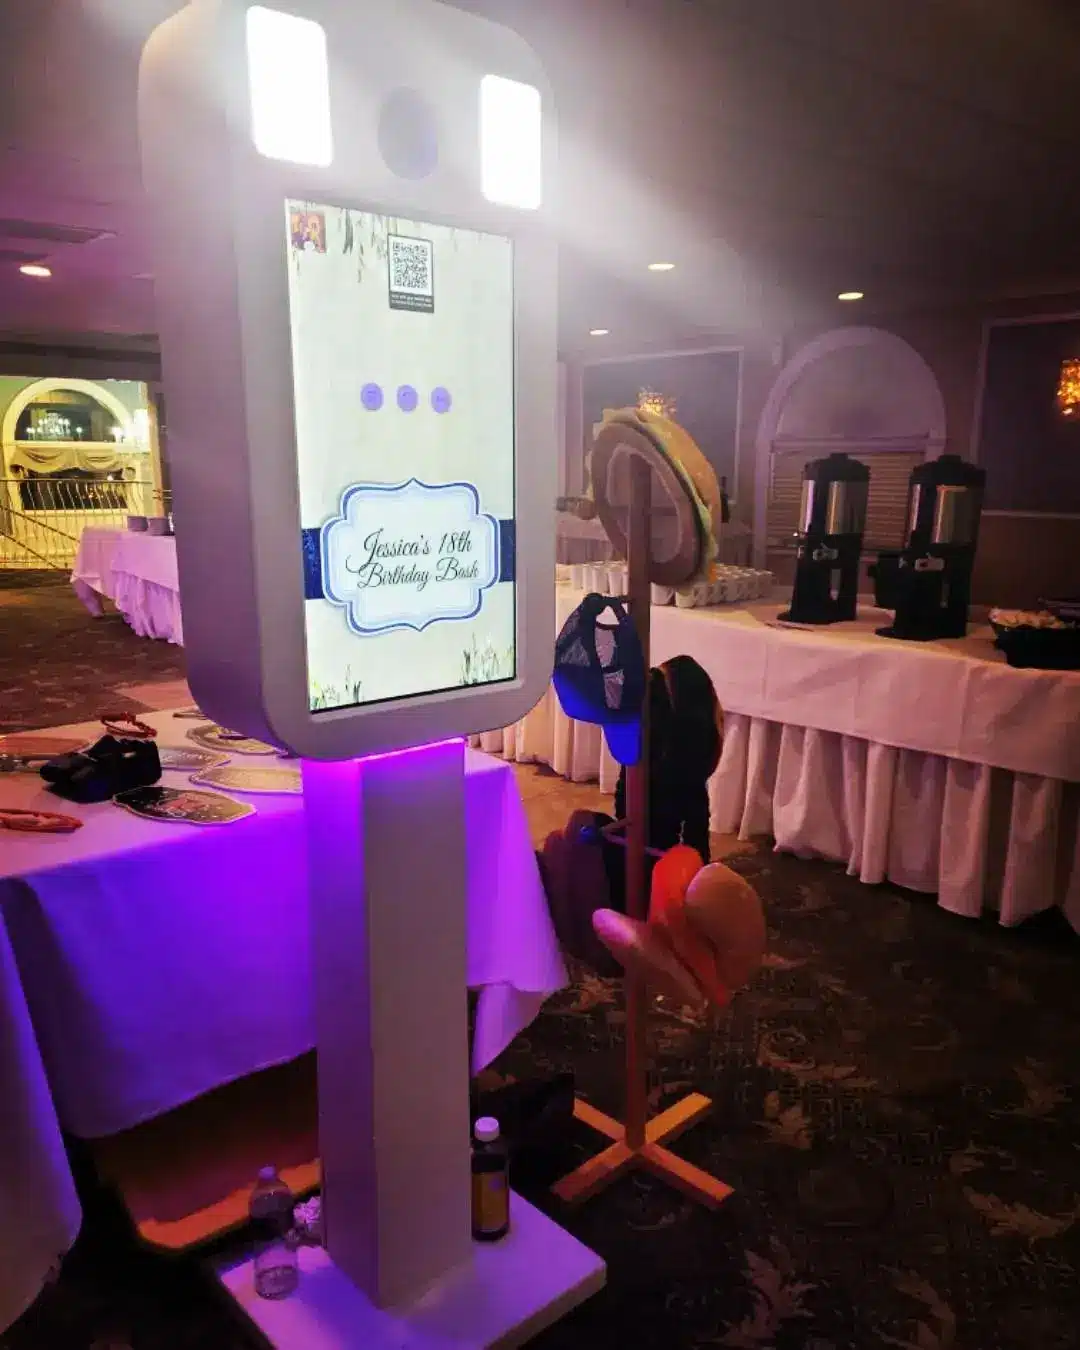 Photobooth-hire-Mixn-it-up-events-dj-hire-new-jersey_result